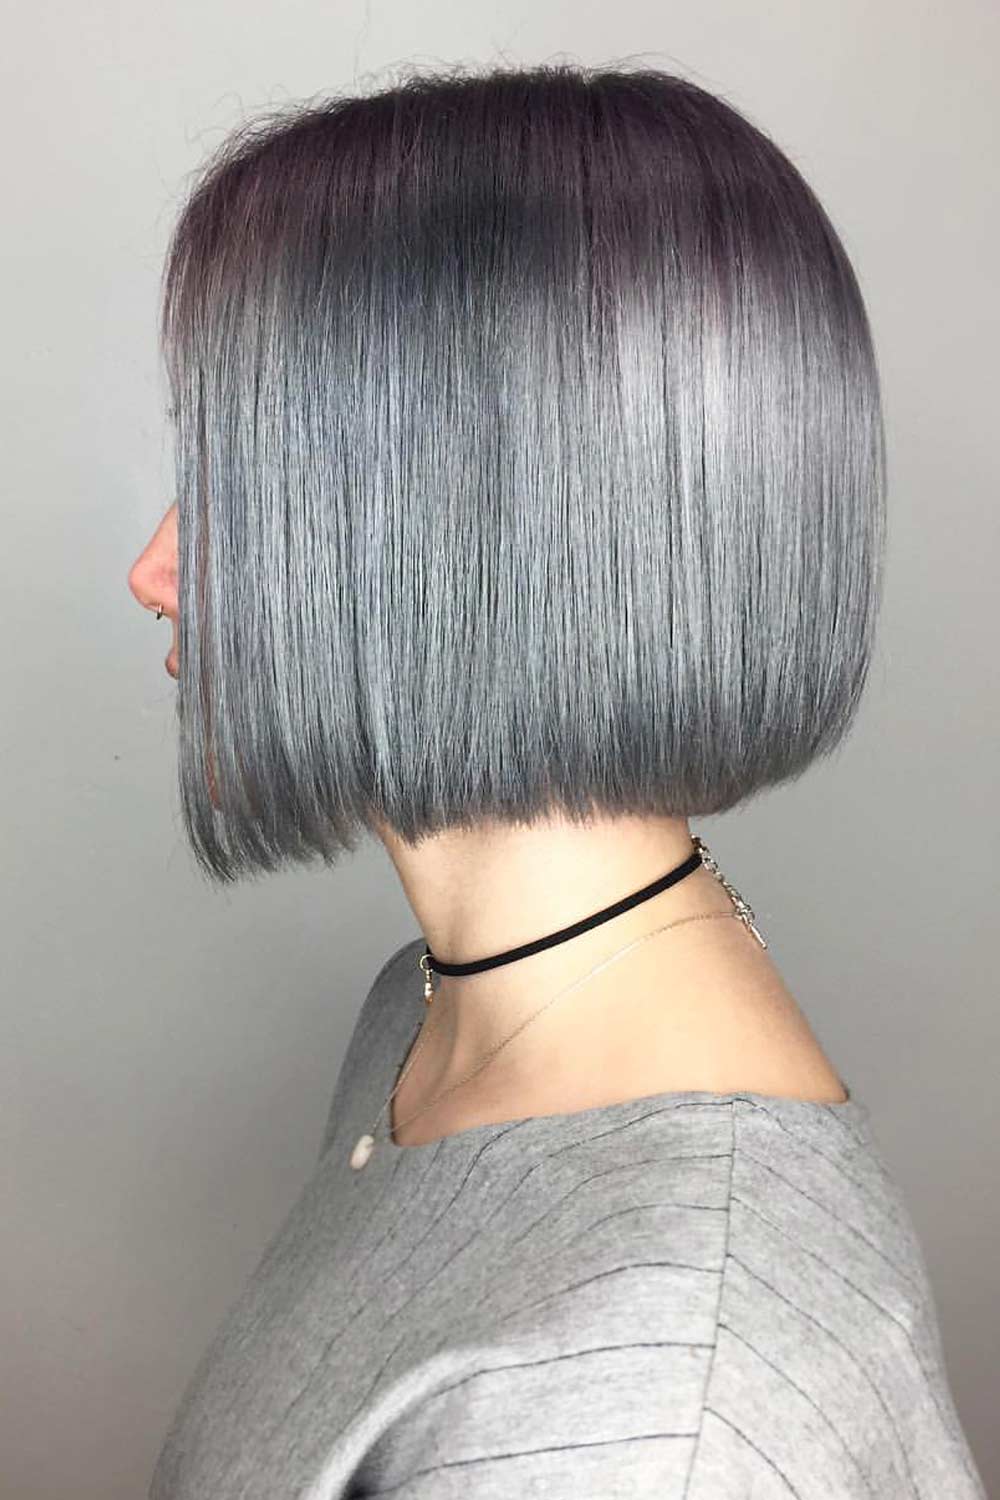 45 Short Grey Hair Cuts and Styles